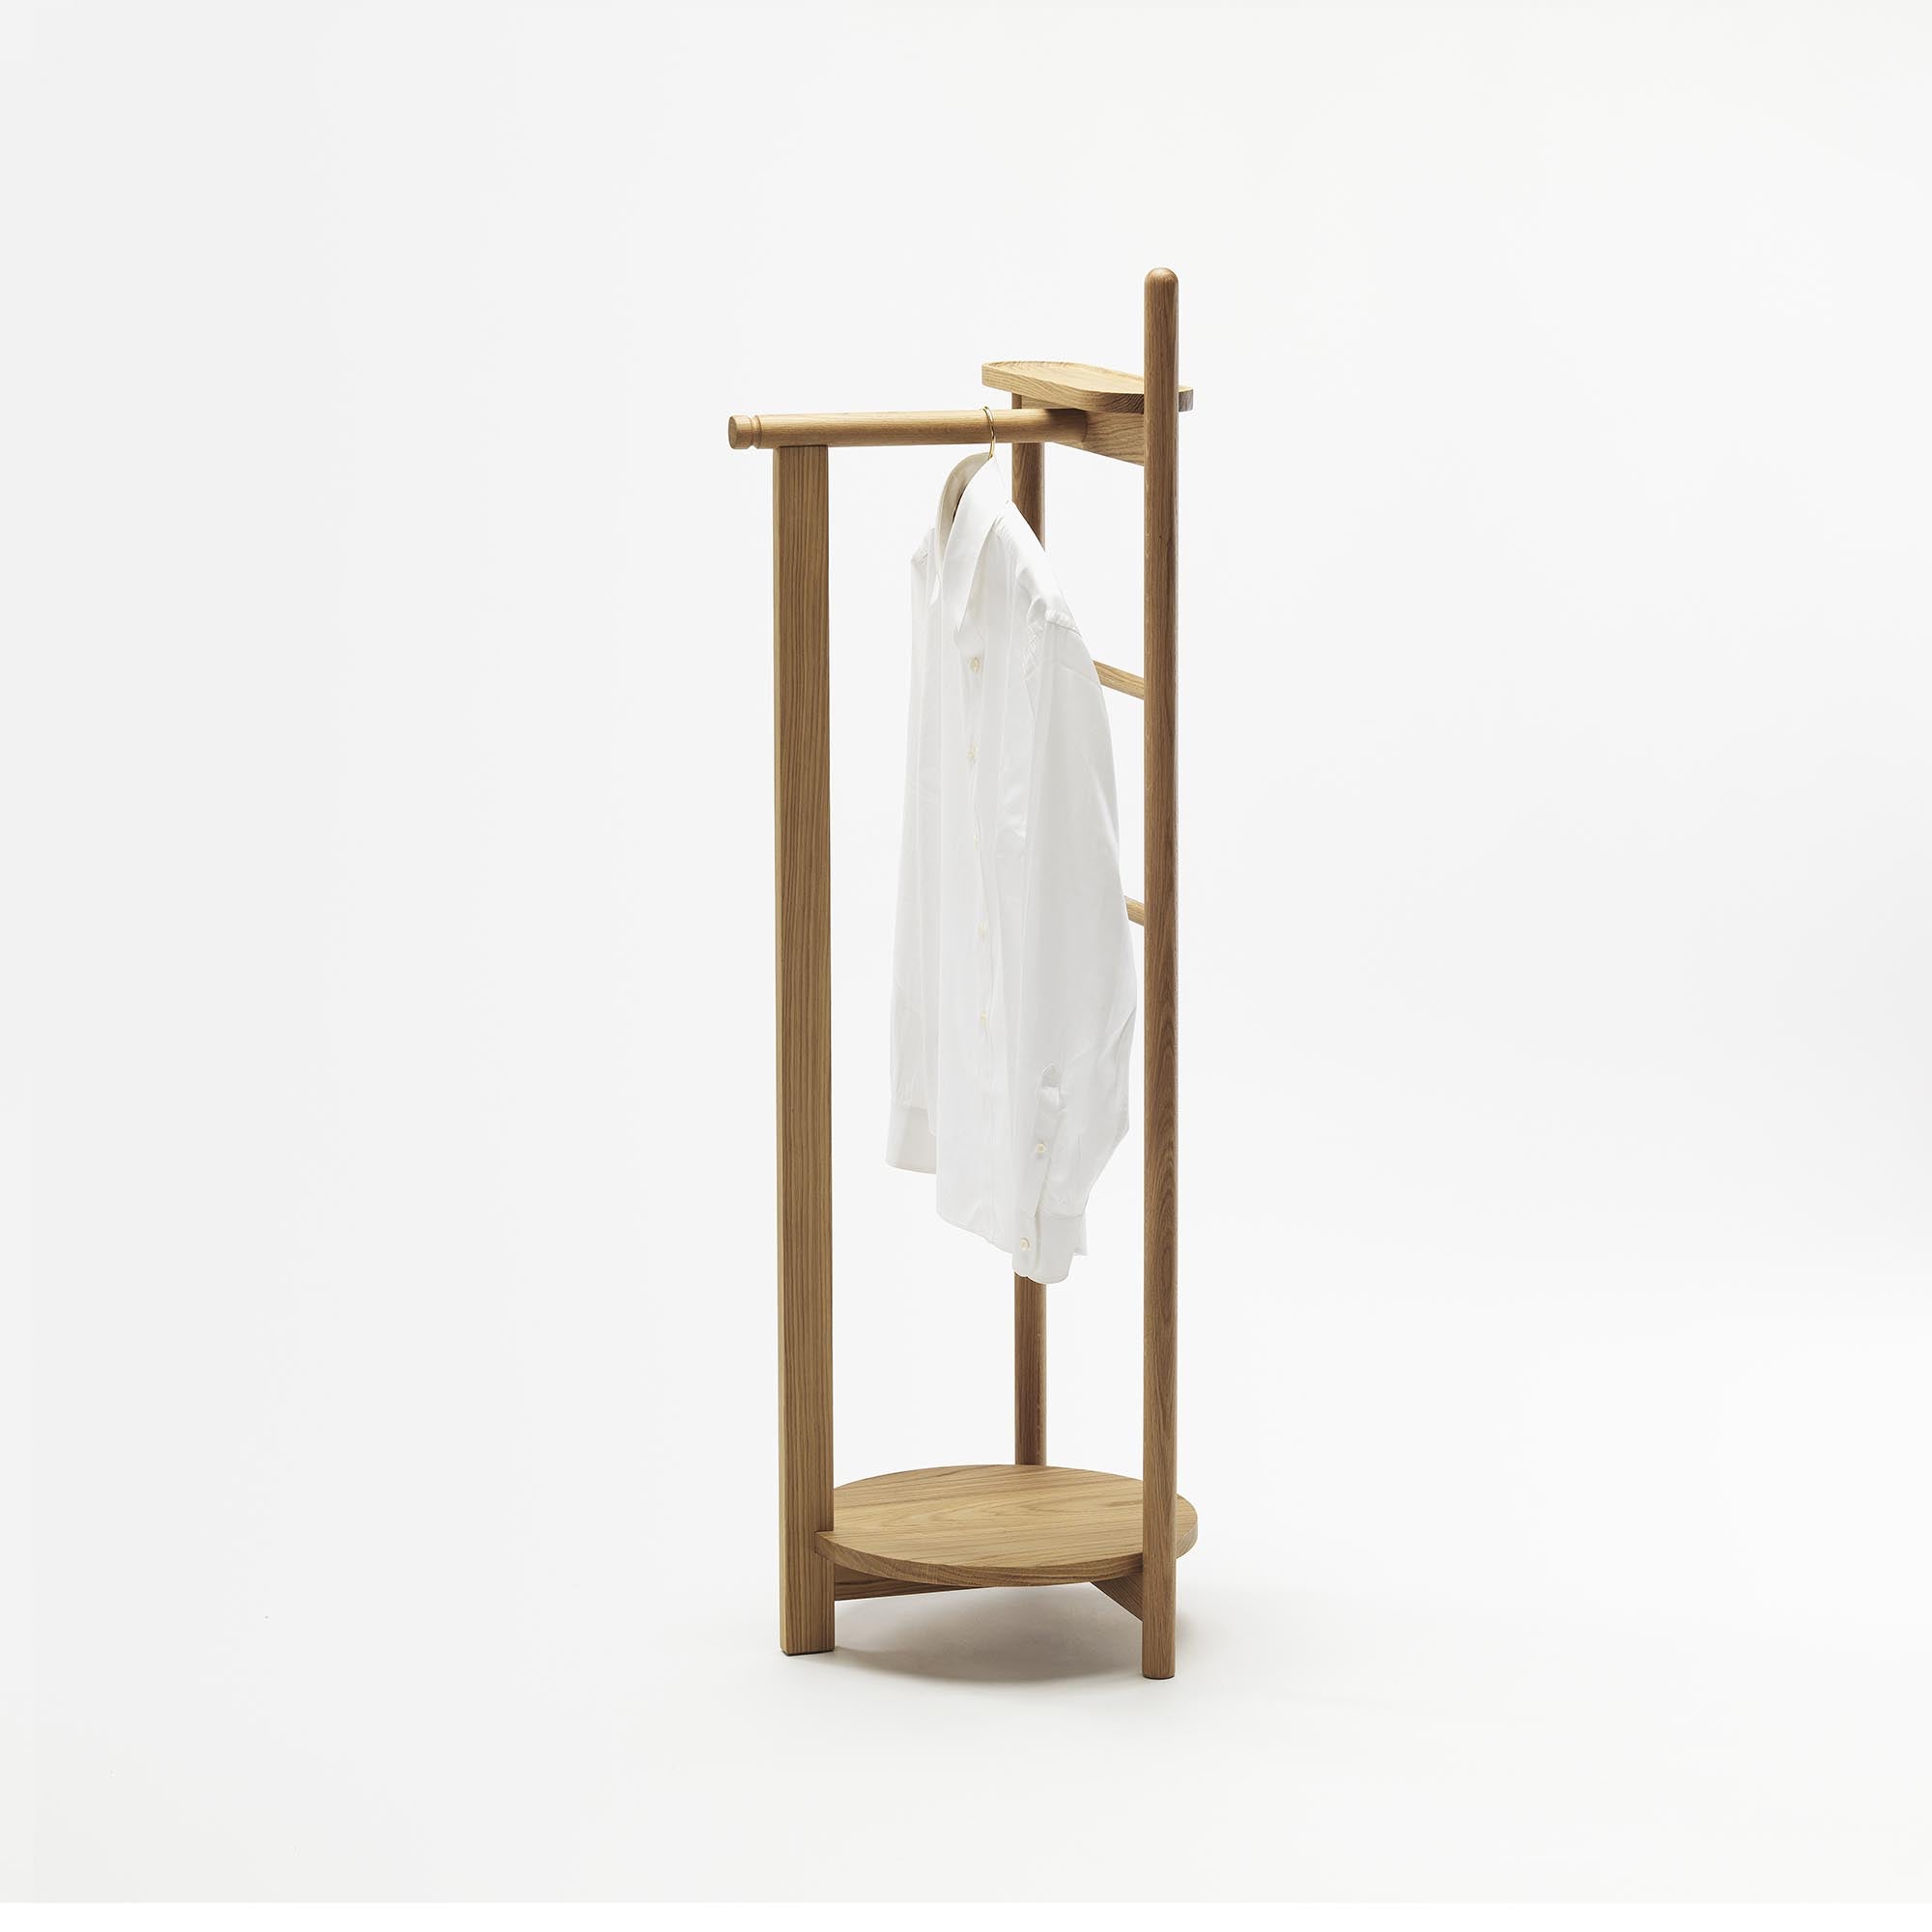 LAUREL Coat Stand Natural Oak left side view with white shirt